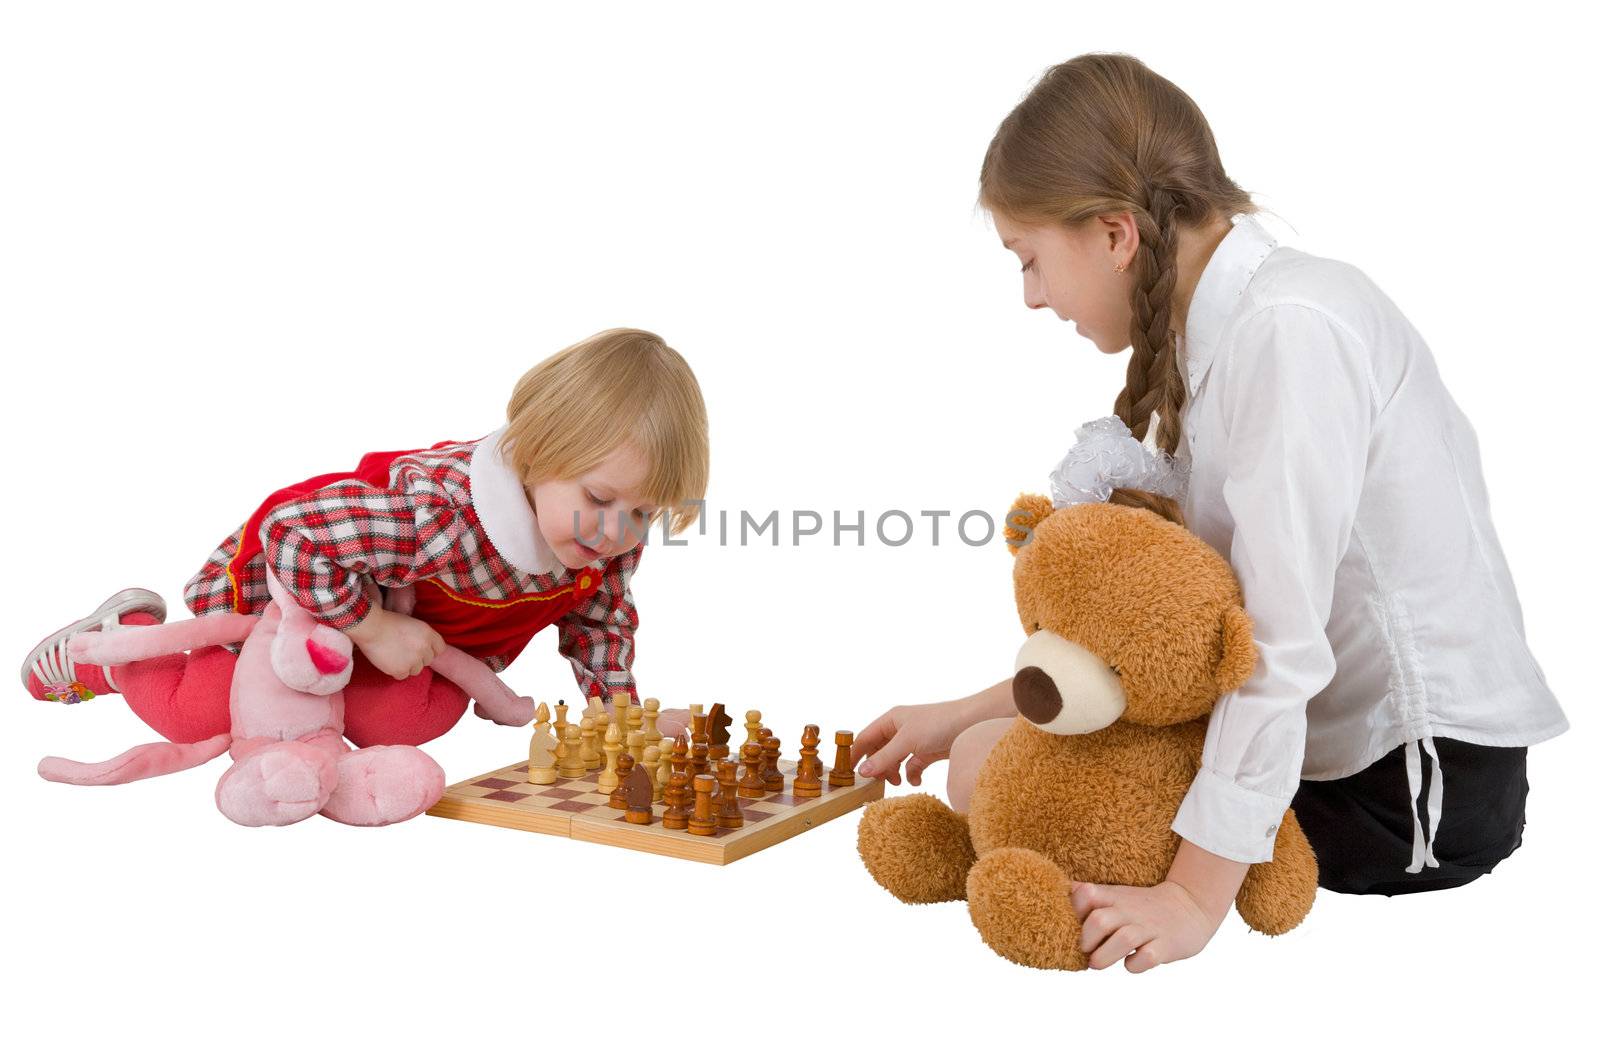 Girls playing chess by pzaxe